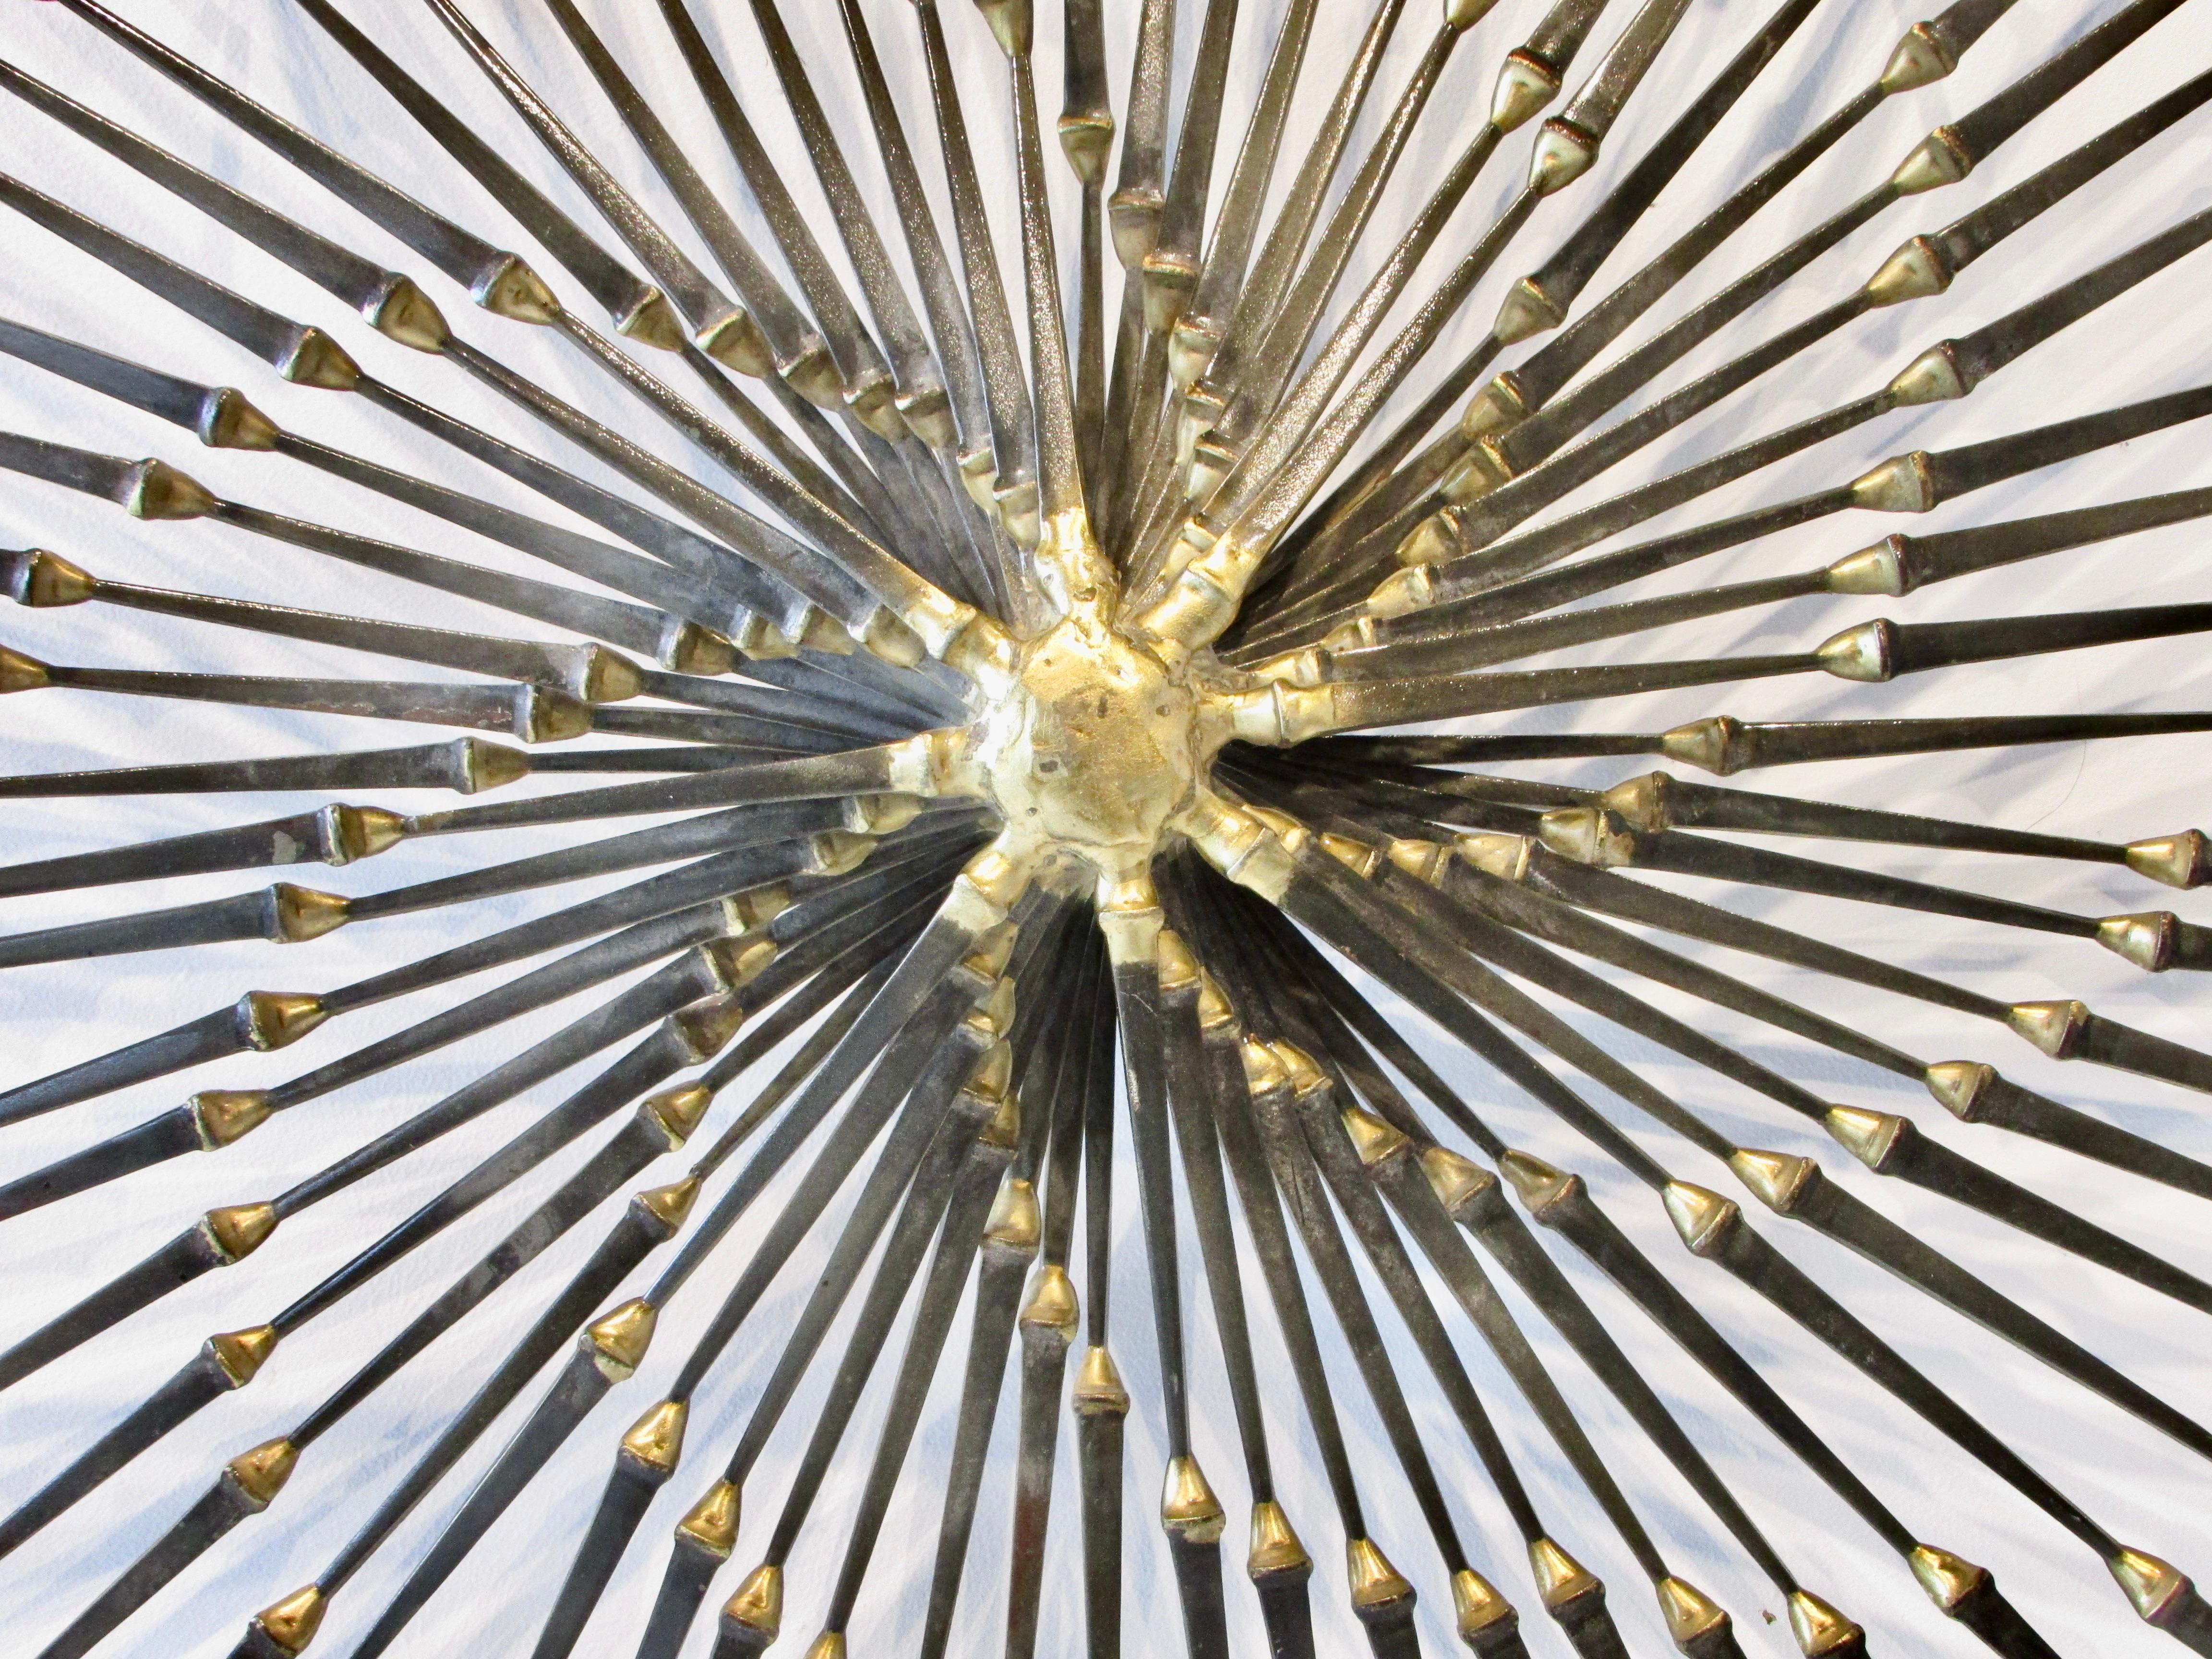 Individual steel spikes brazed together in a large fanned out pattern. Assembled by Ron Schmidt.